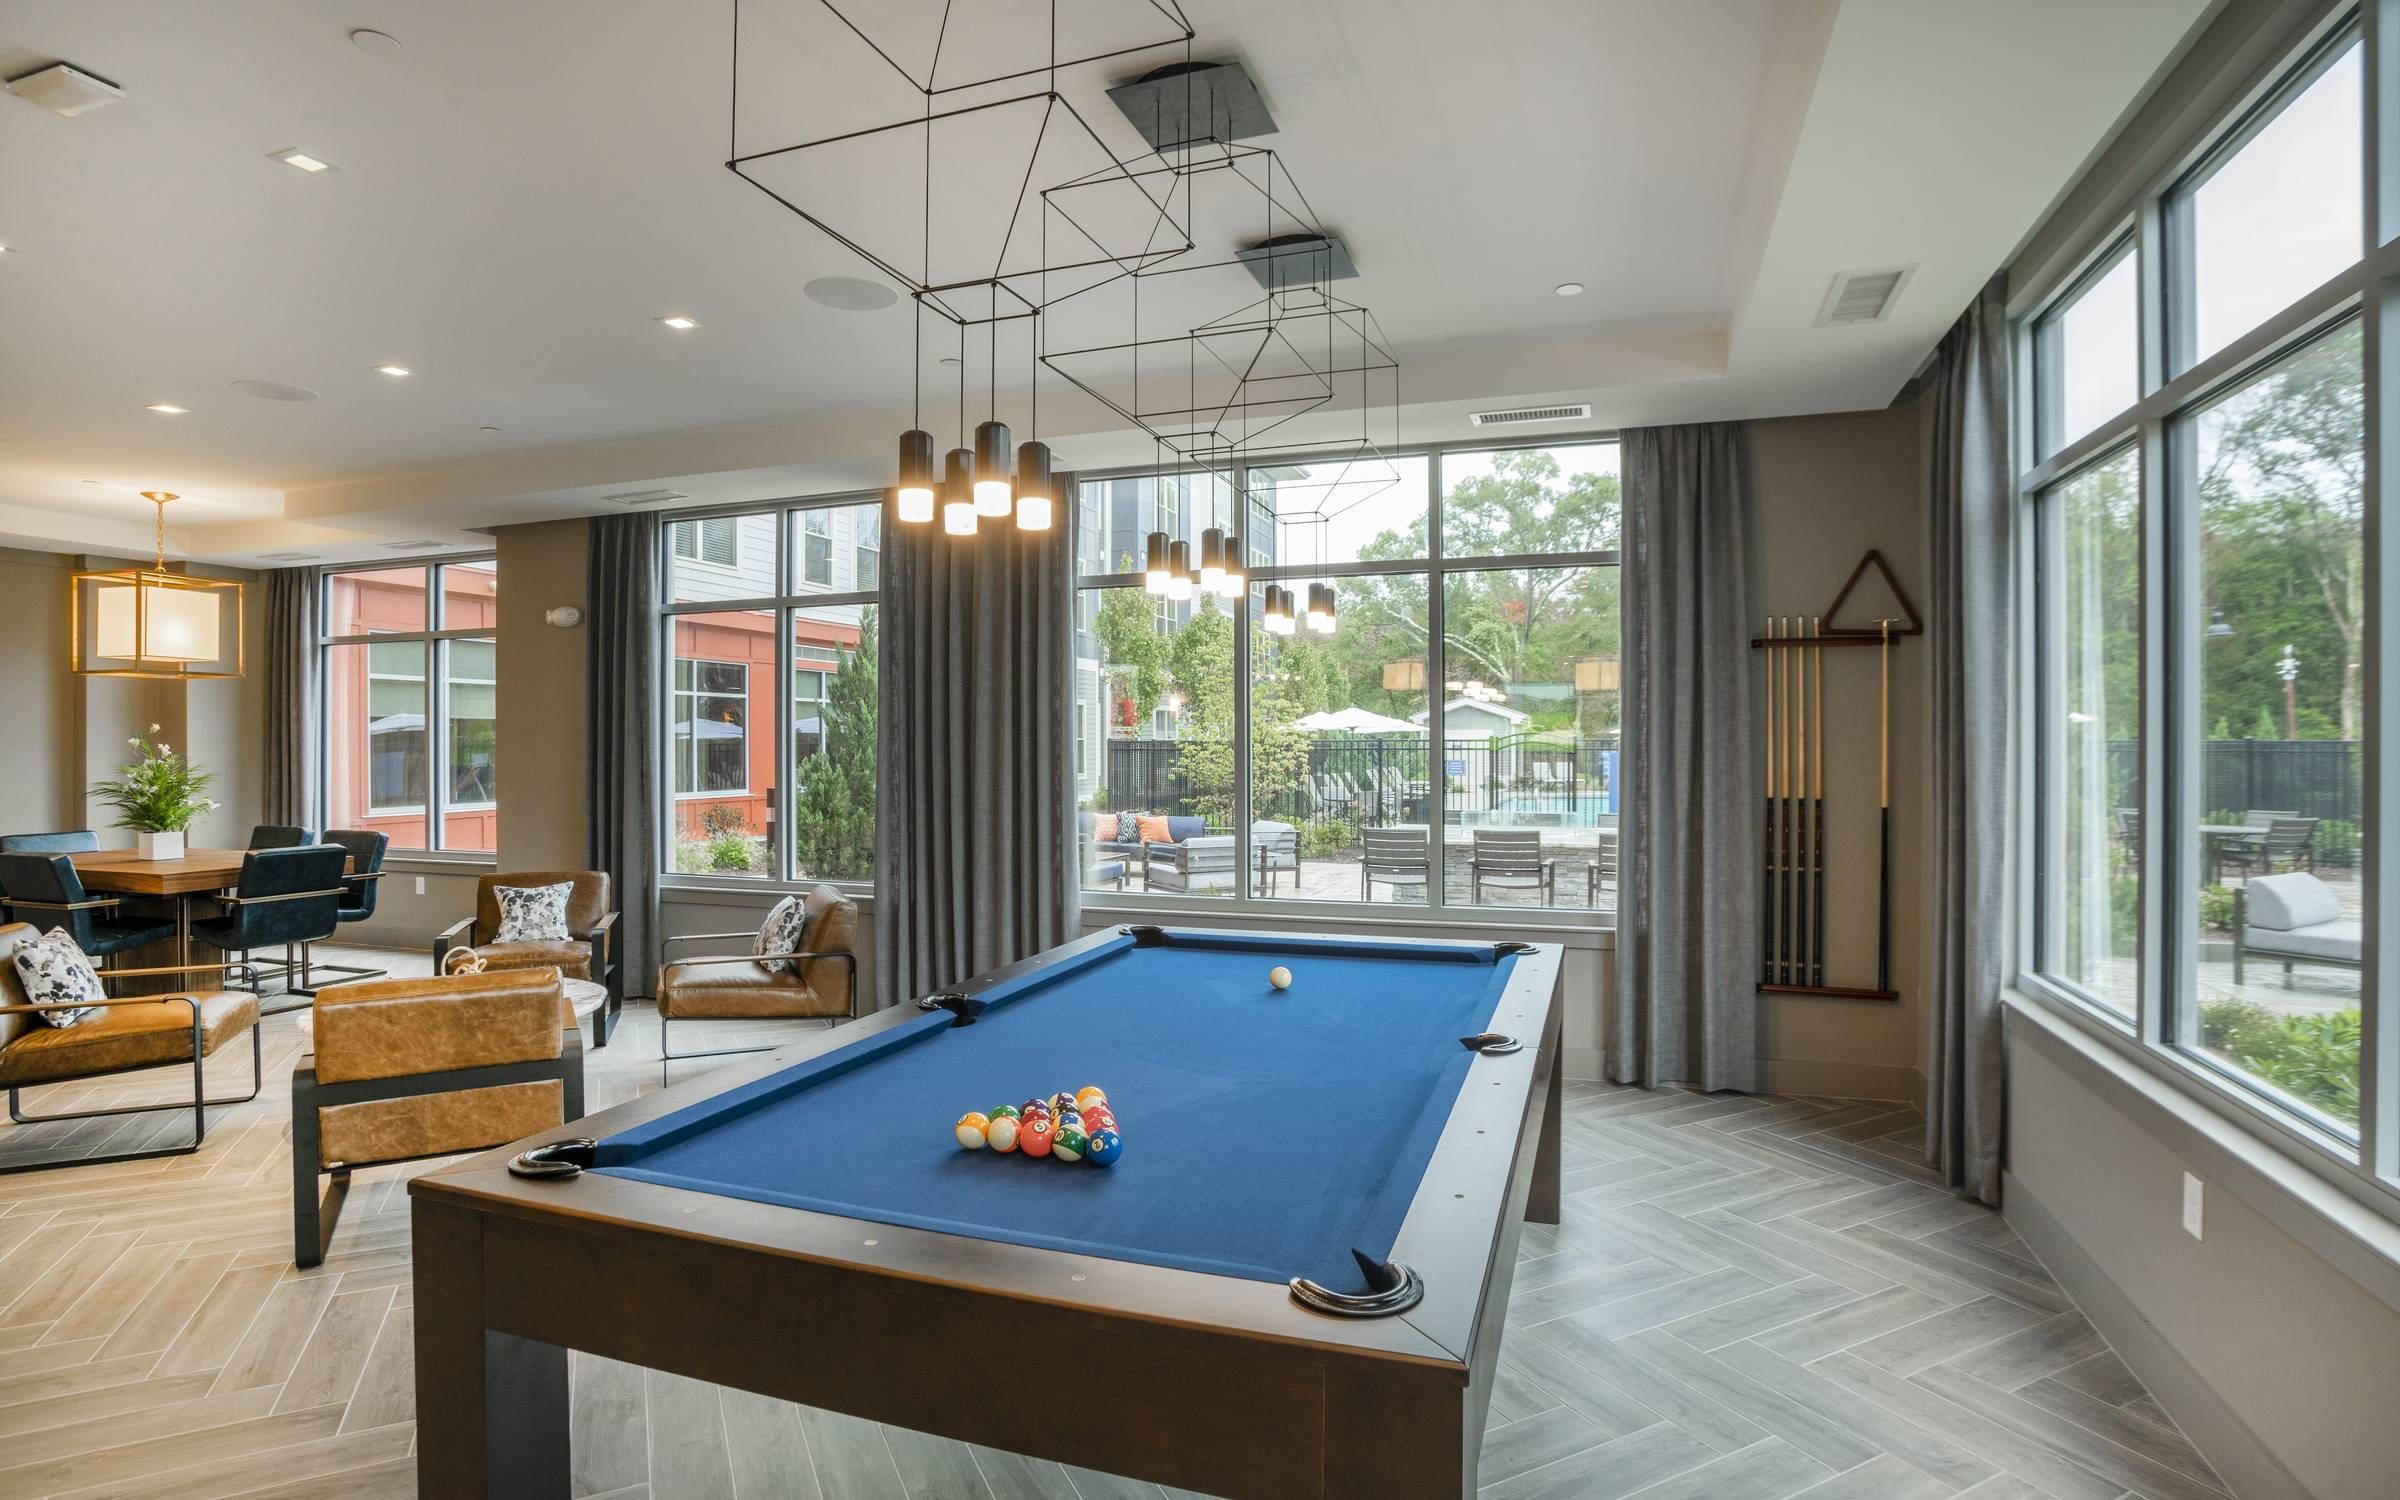 Alta Depot clubroom with billiards table.